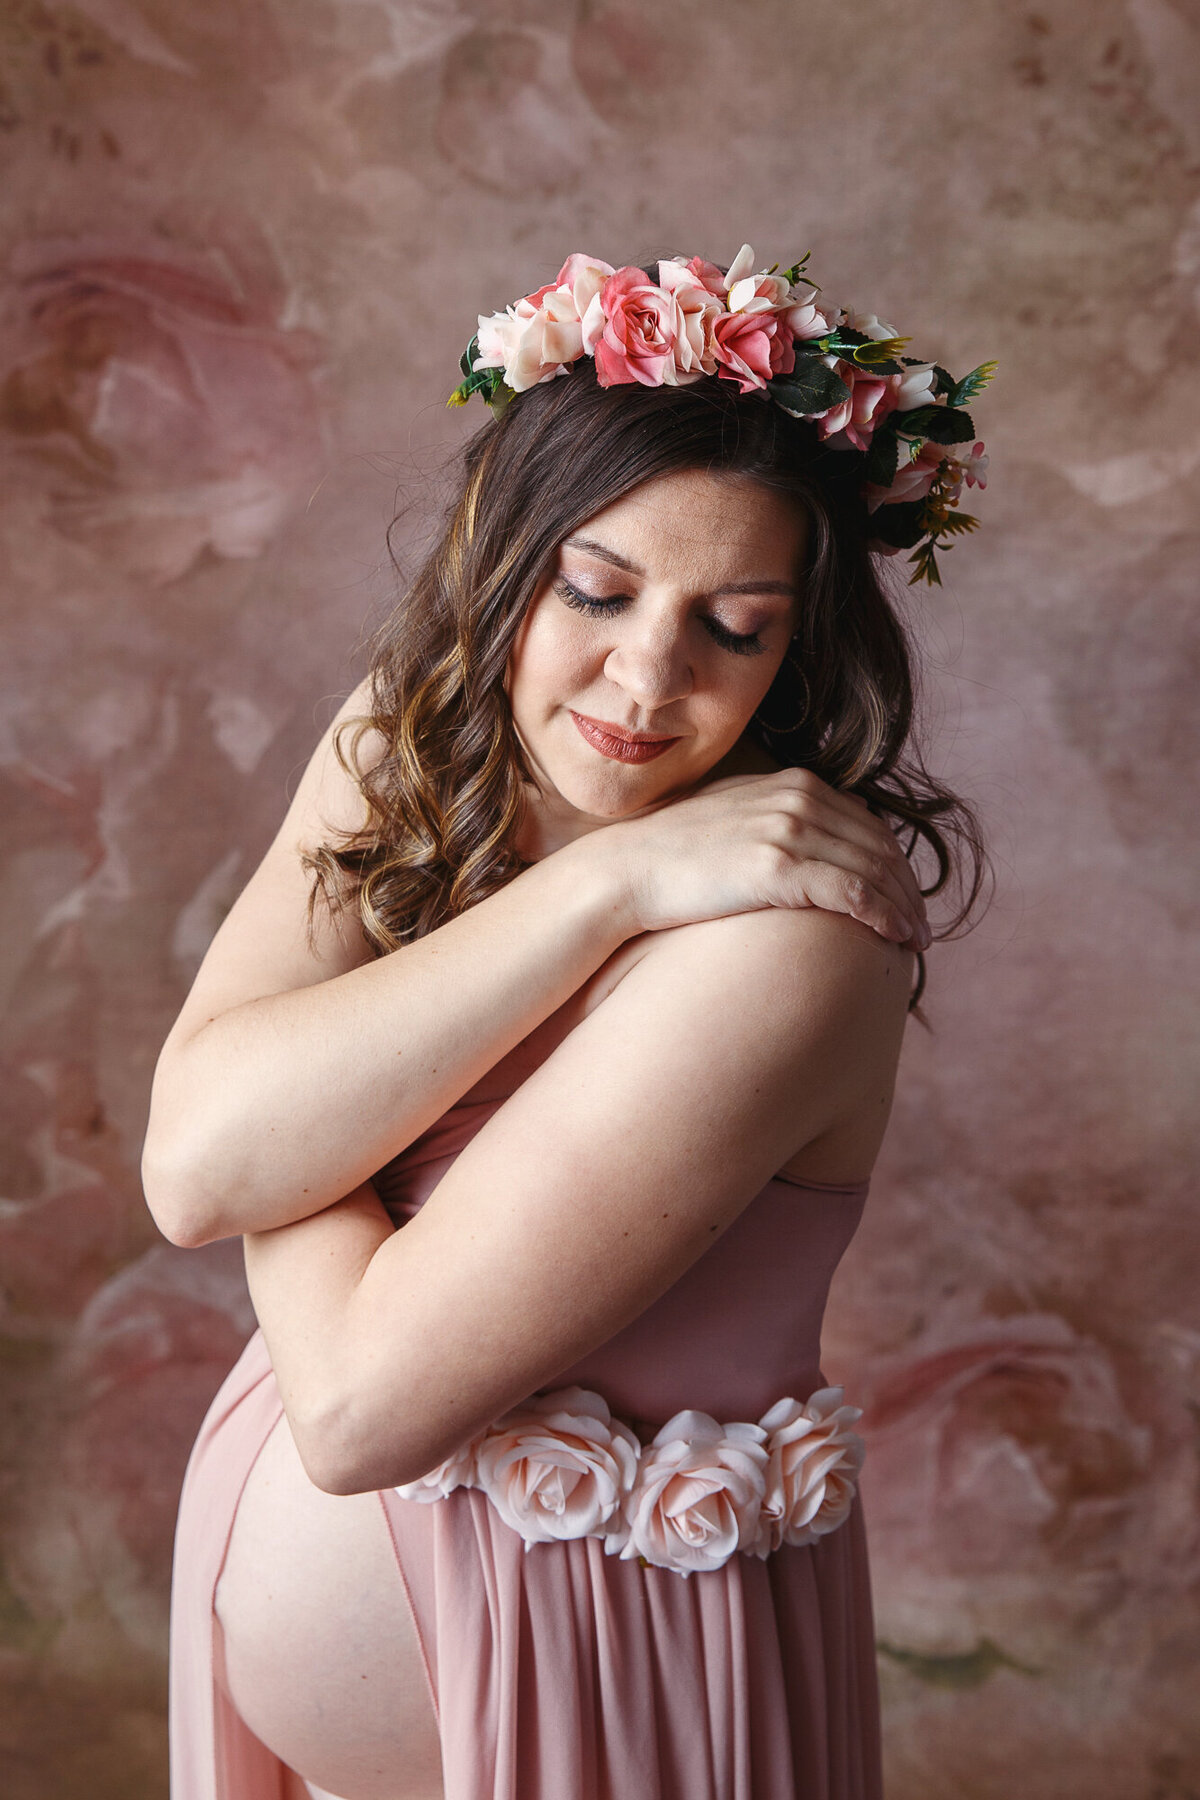 Closeup Maternity Portrait of a woman dressed in pink with her baby bump showing